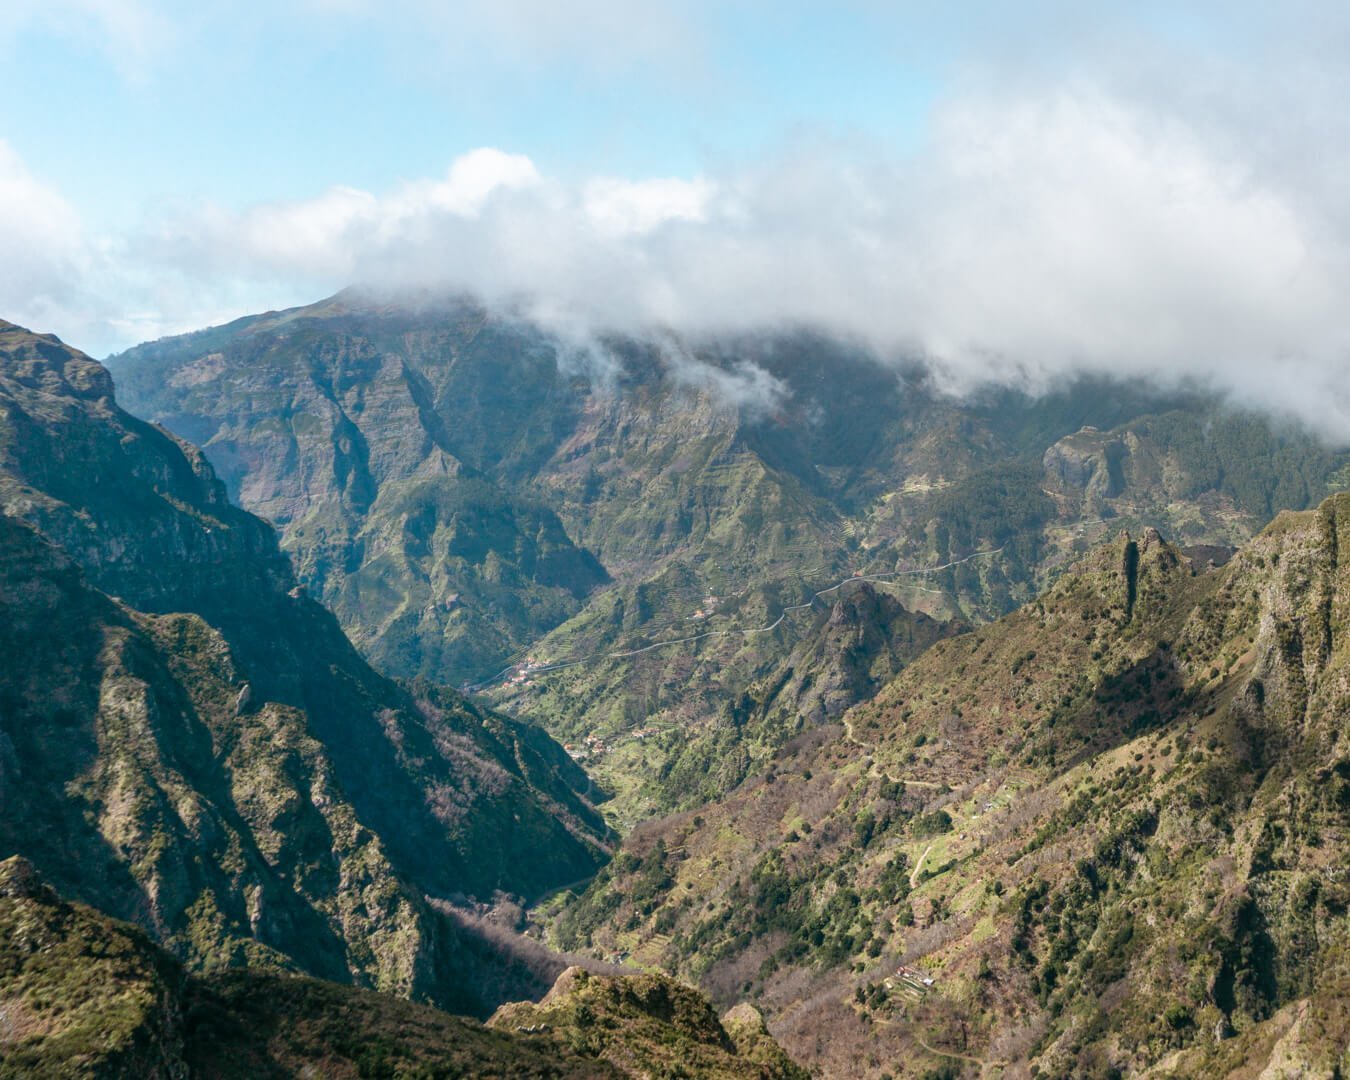 Views of nuns Valley in Madeira.